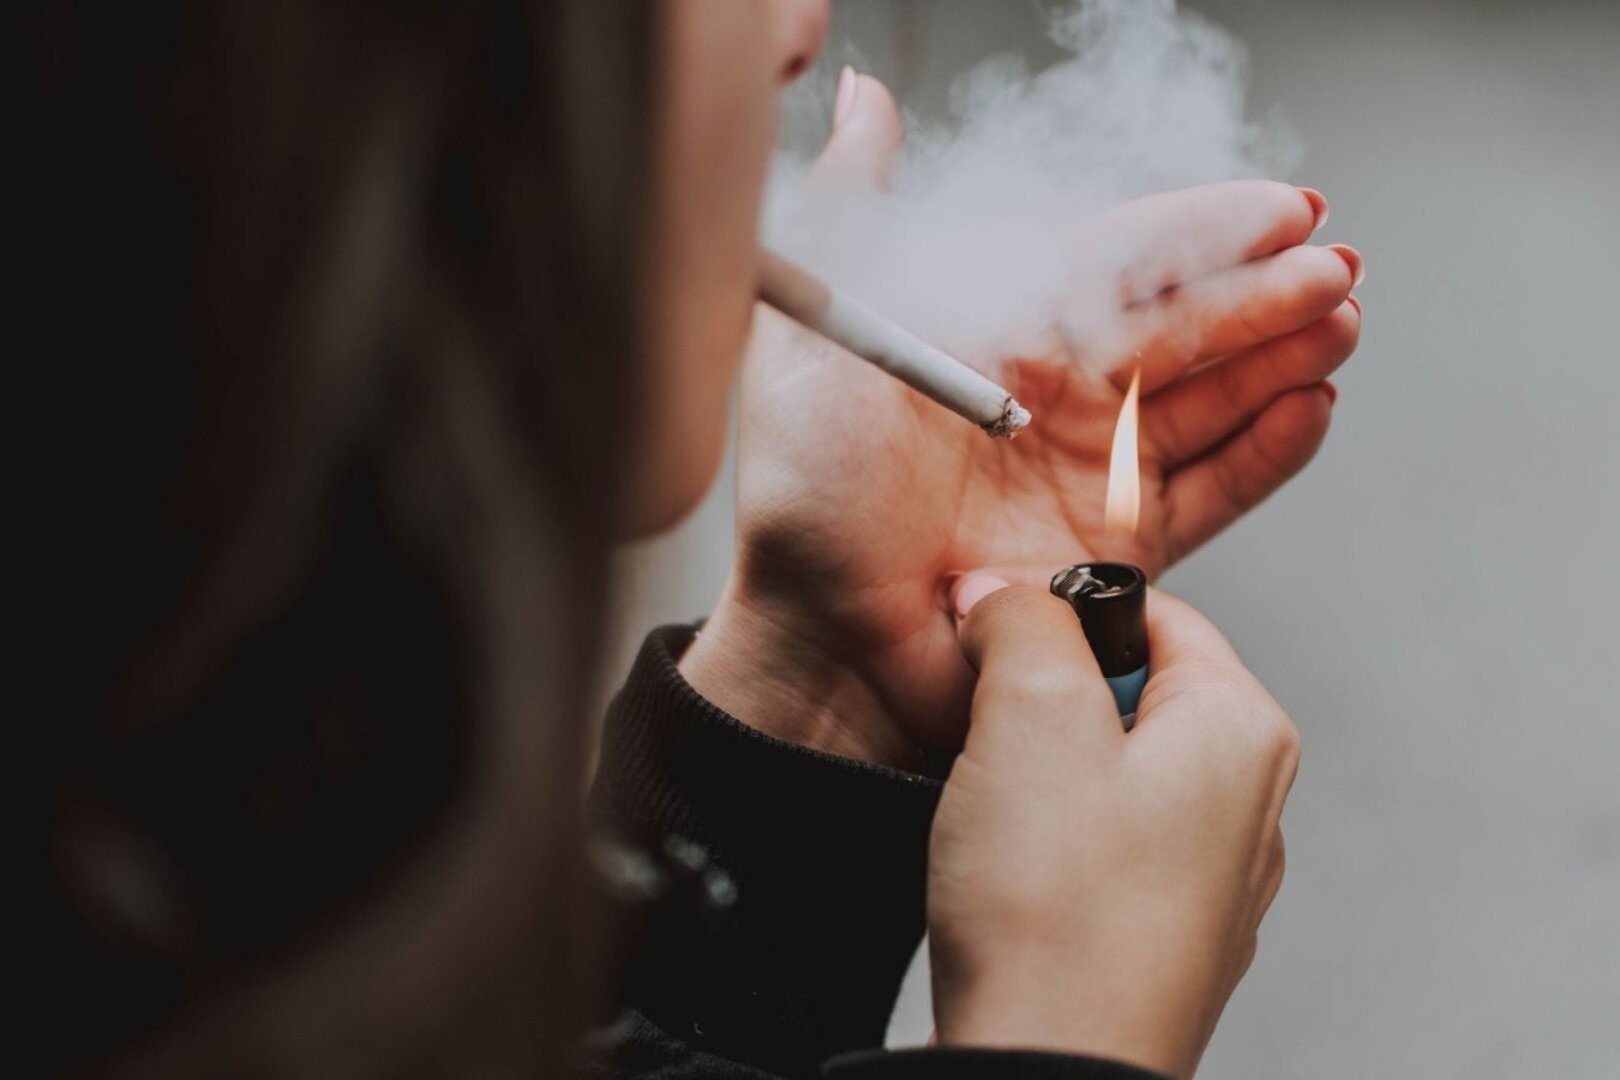 Shocking: Parent Gives Teenager Permission To Smoke At Home - Is It Legal?